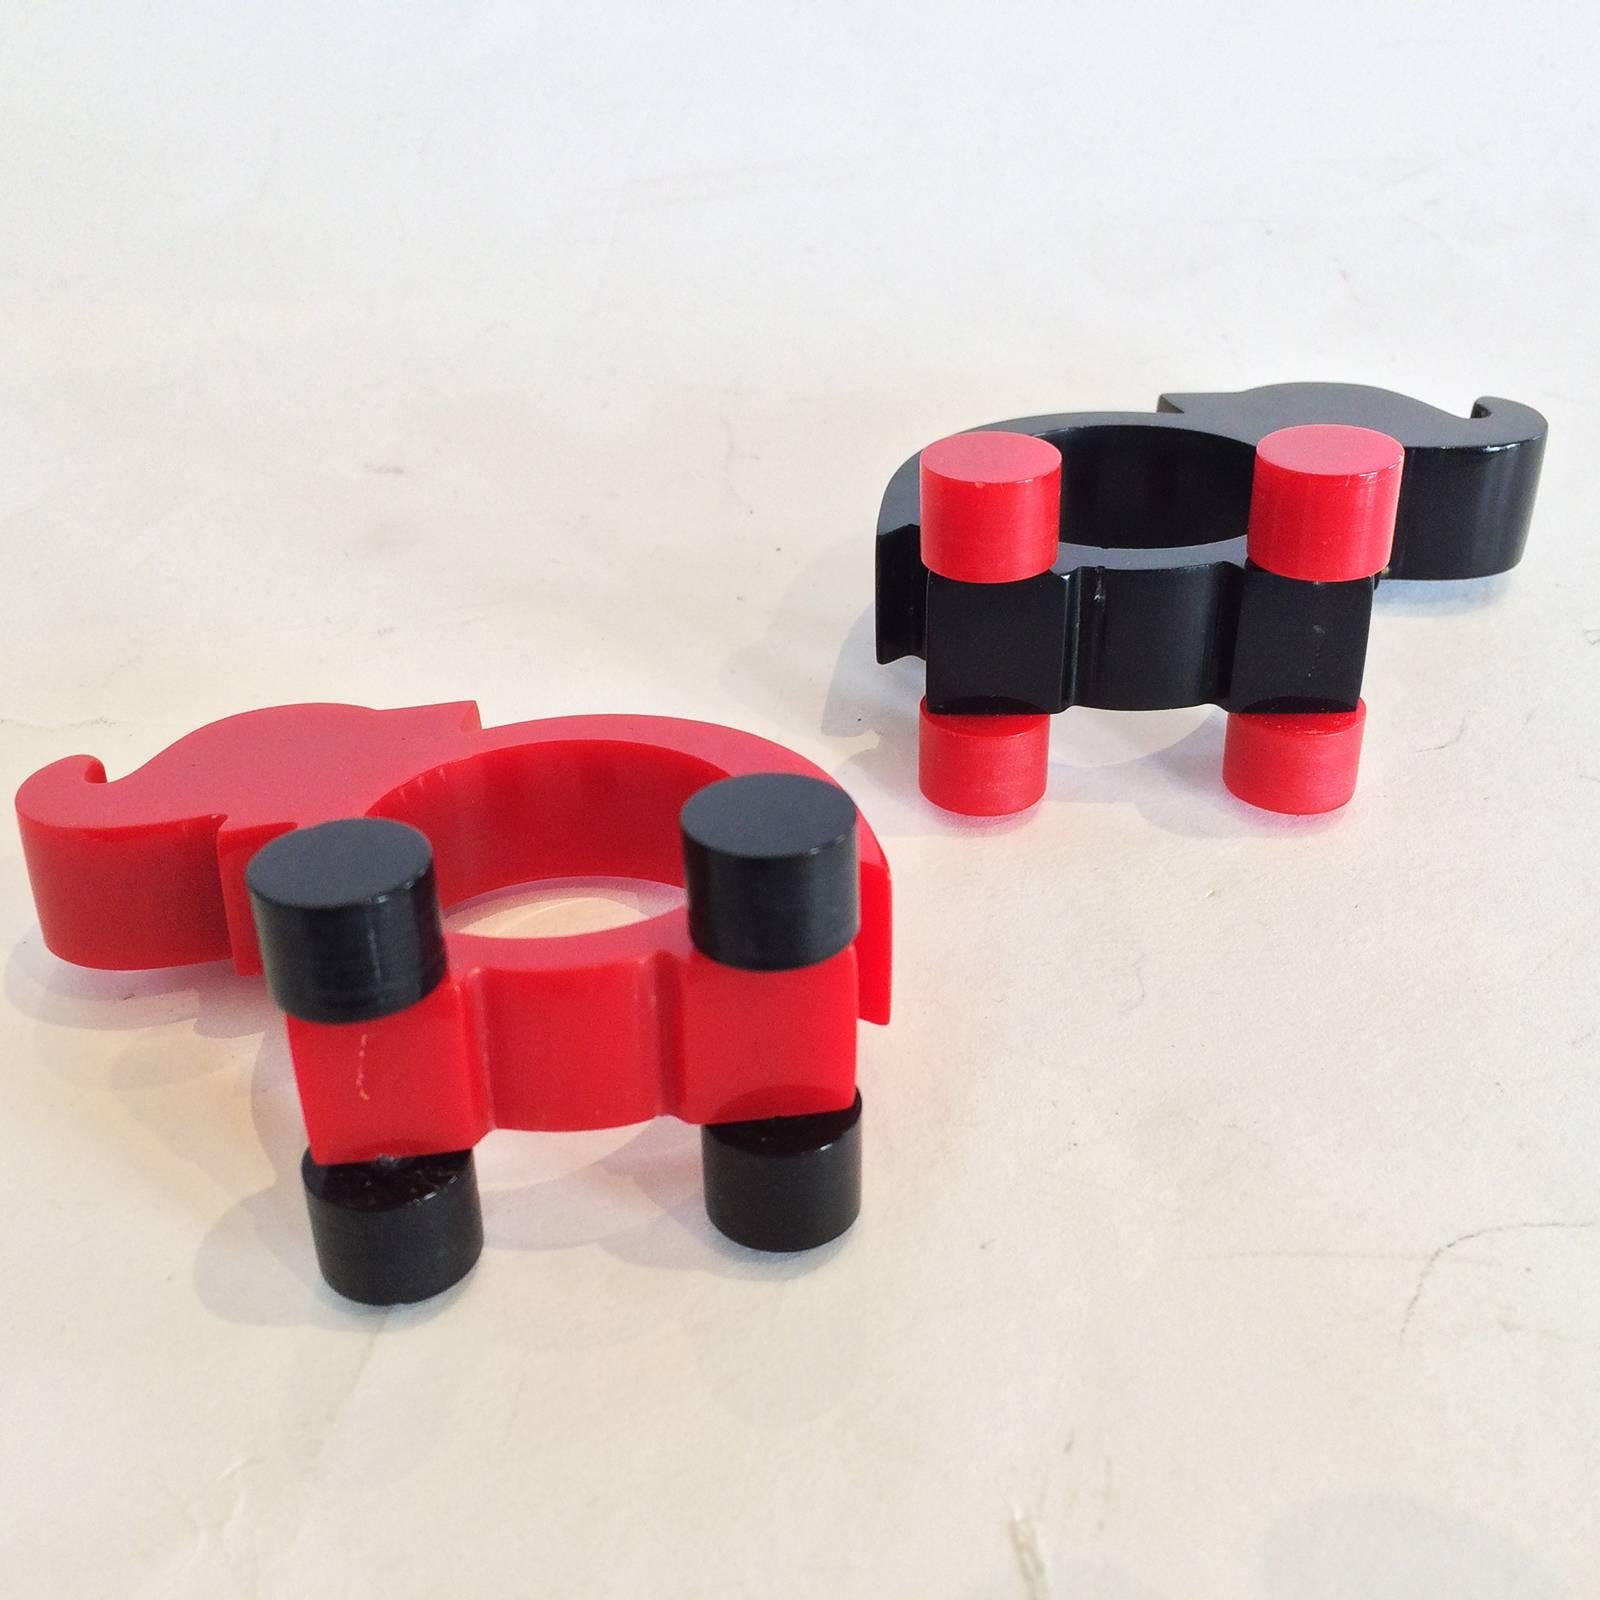 Art Deco pair of elephants in red and black bakelite napkin holders, on wheeled feet. Both perfect with no losses, damage or repairs, circa 1930. U.S.A. Dimensions are approx. : 7.5cm wide x 4cm wide incl. wheels x 5.5cm high.